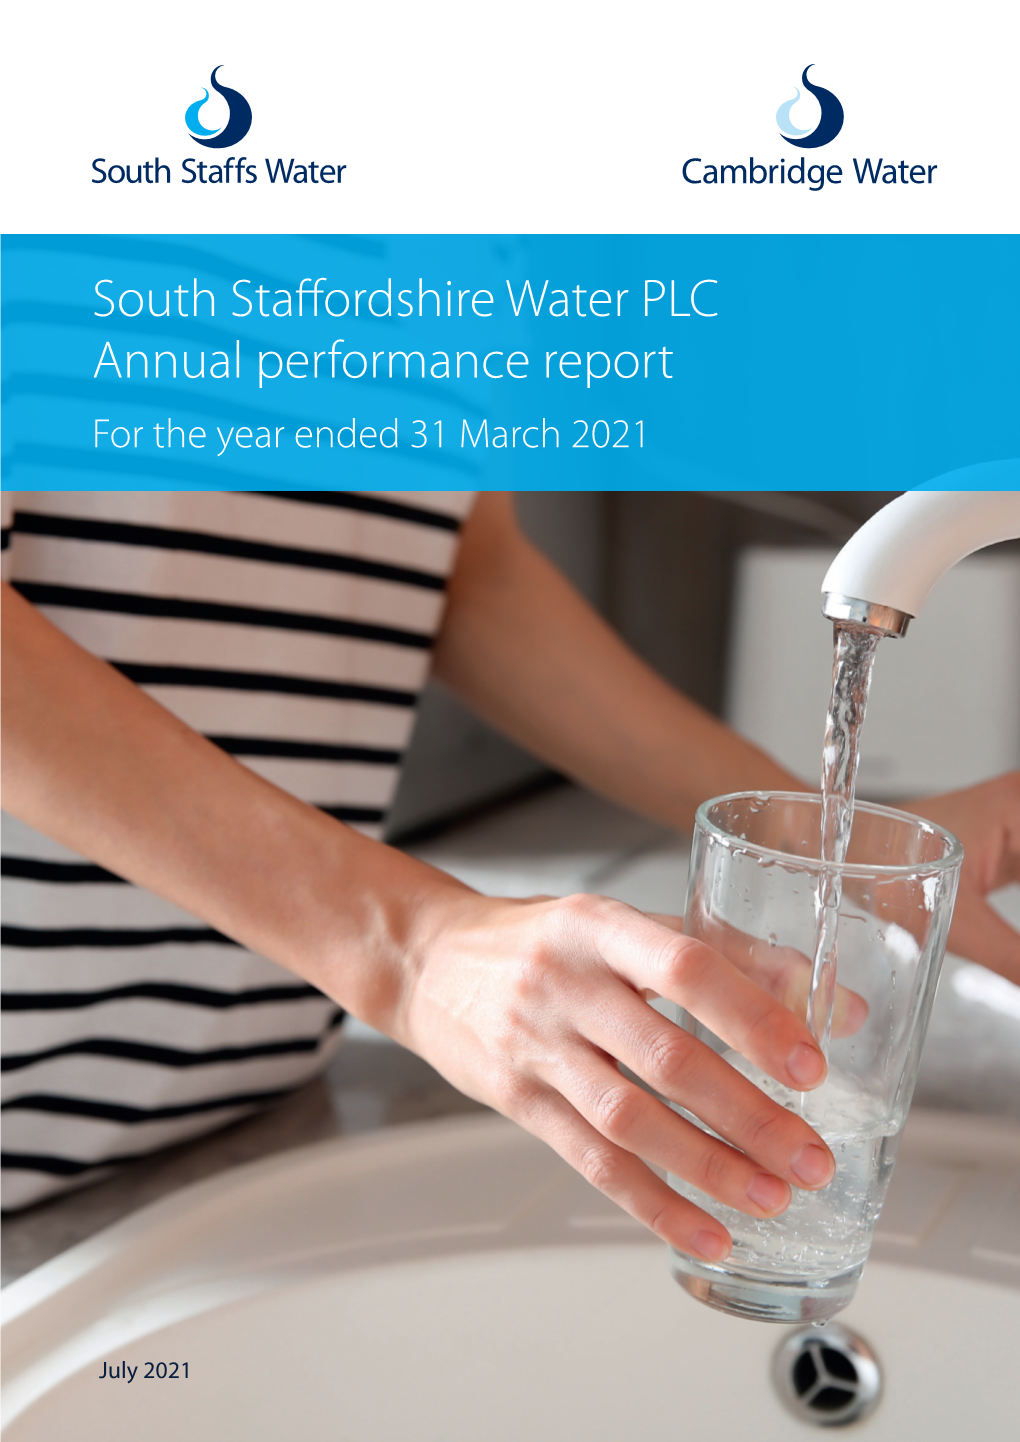 South Staffordshire Water PLC Annual Performance Report for the Year Ended 31 March 2021